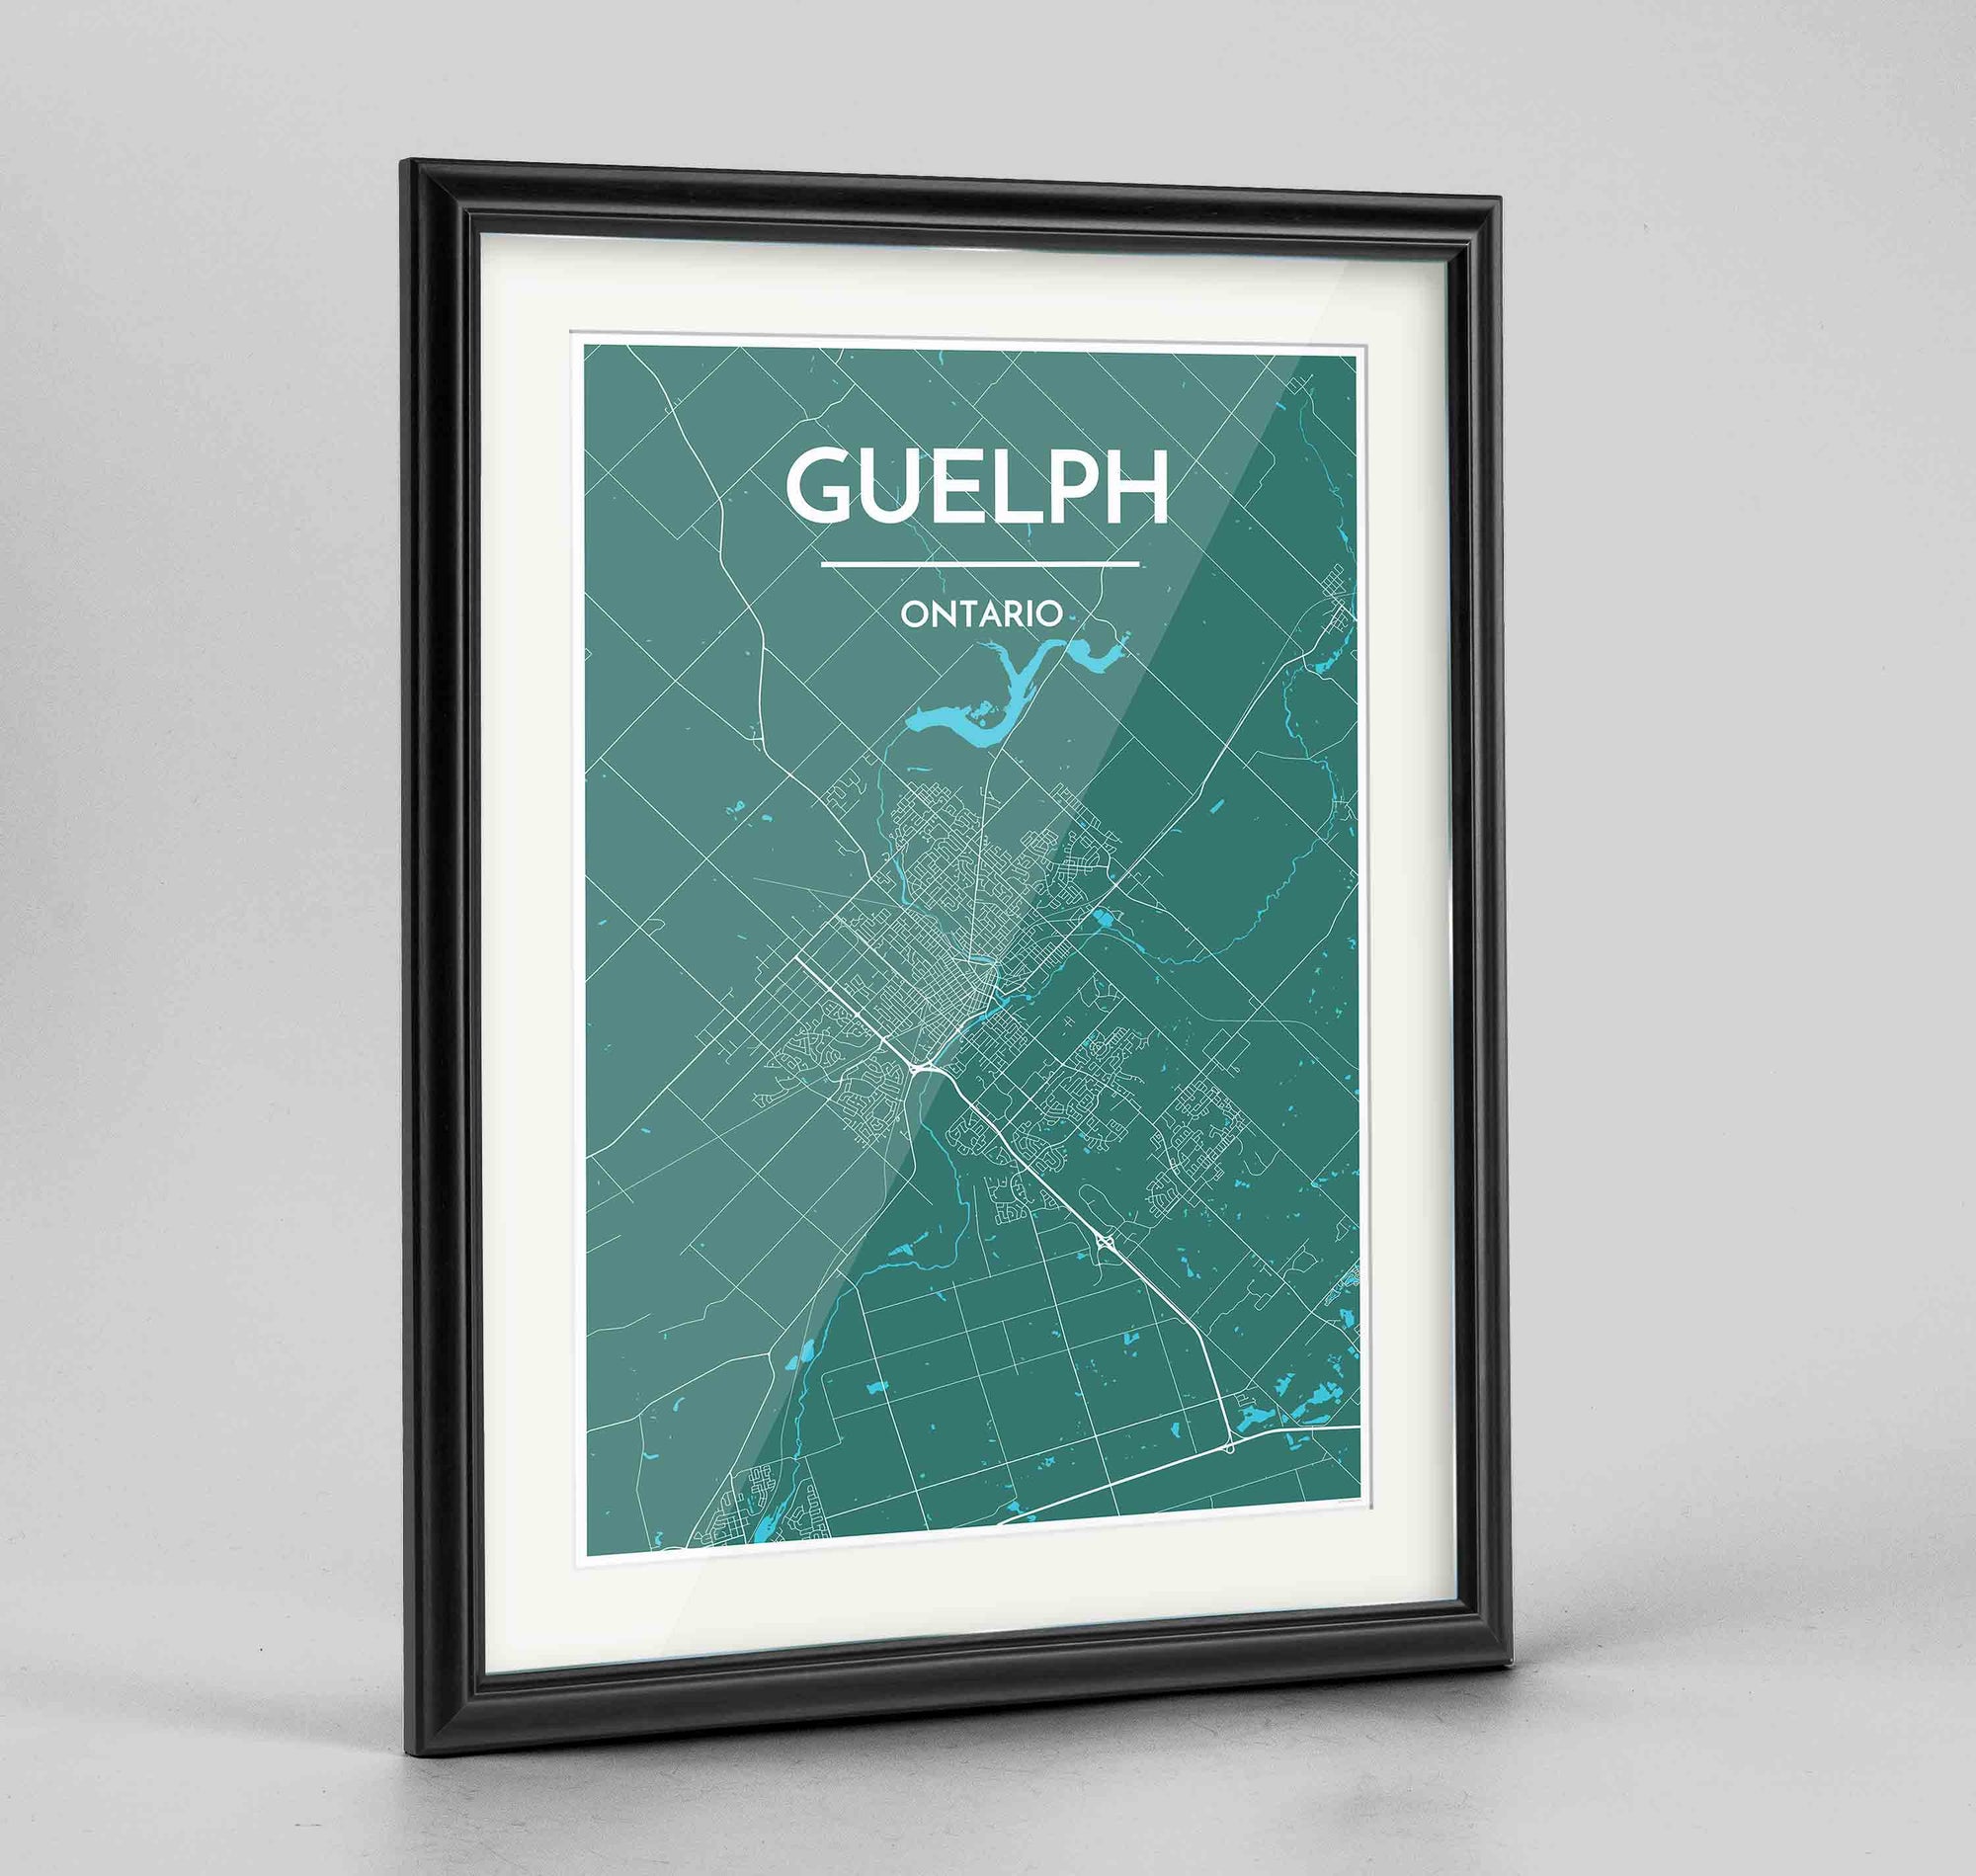 Framed Guelph City Map 24x36" Traditional Black frame Point Two Design Group